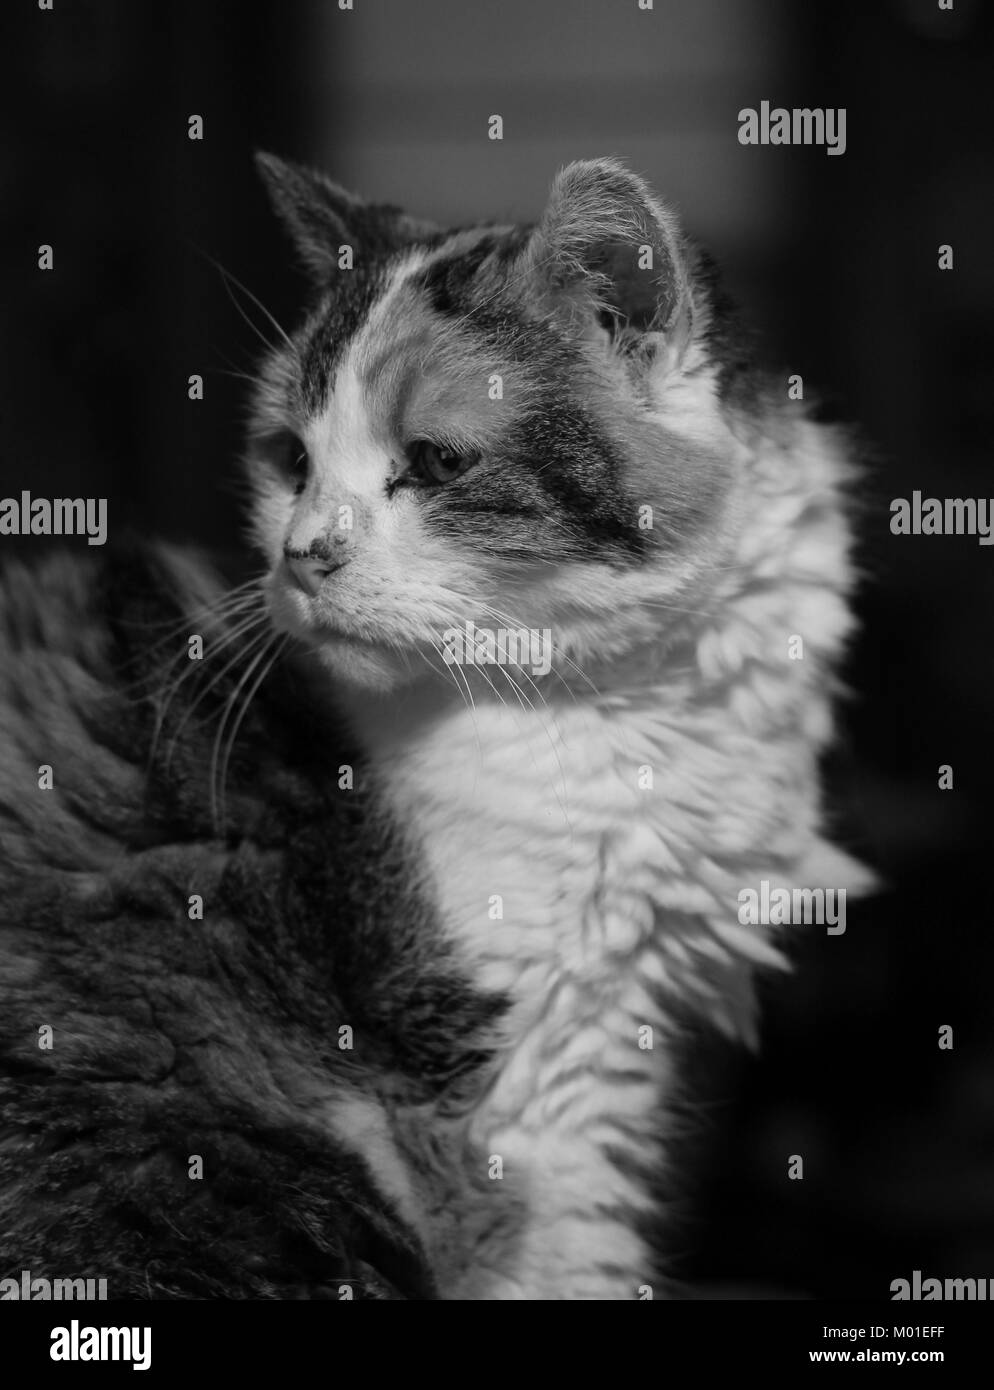 Black-and-white close-up image of a calico cat Stock Photo